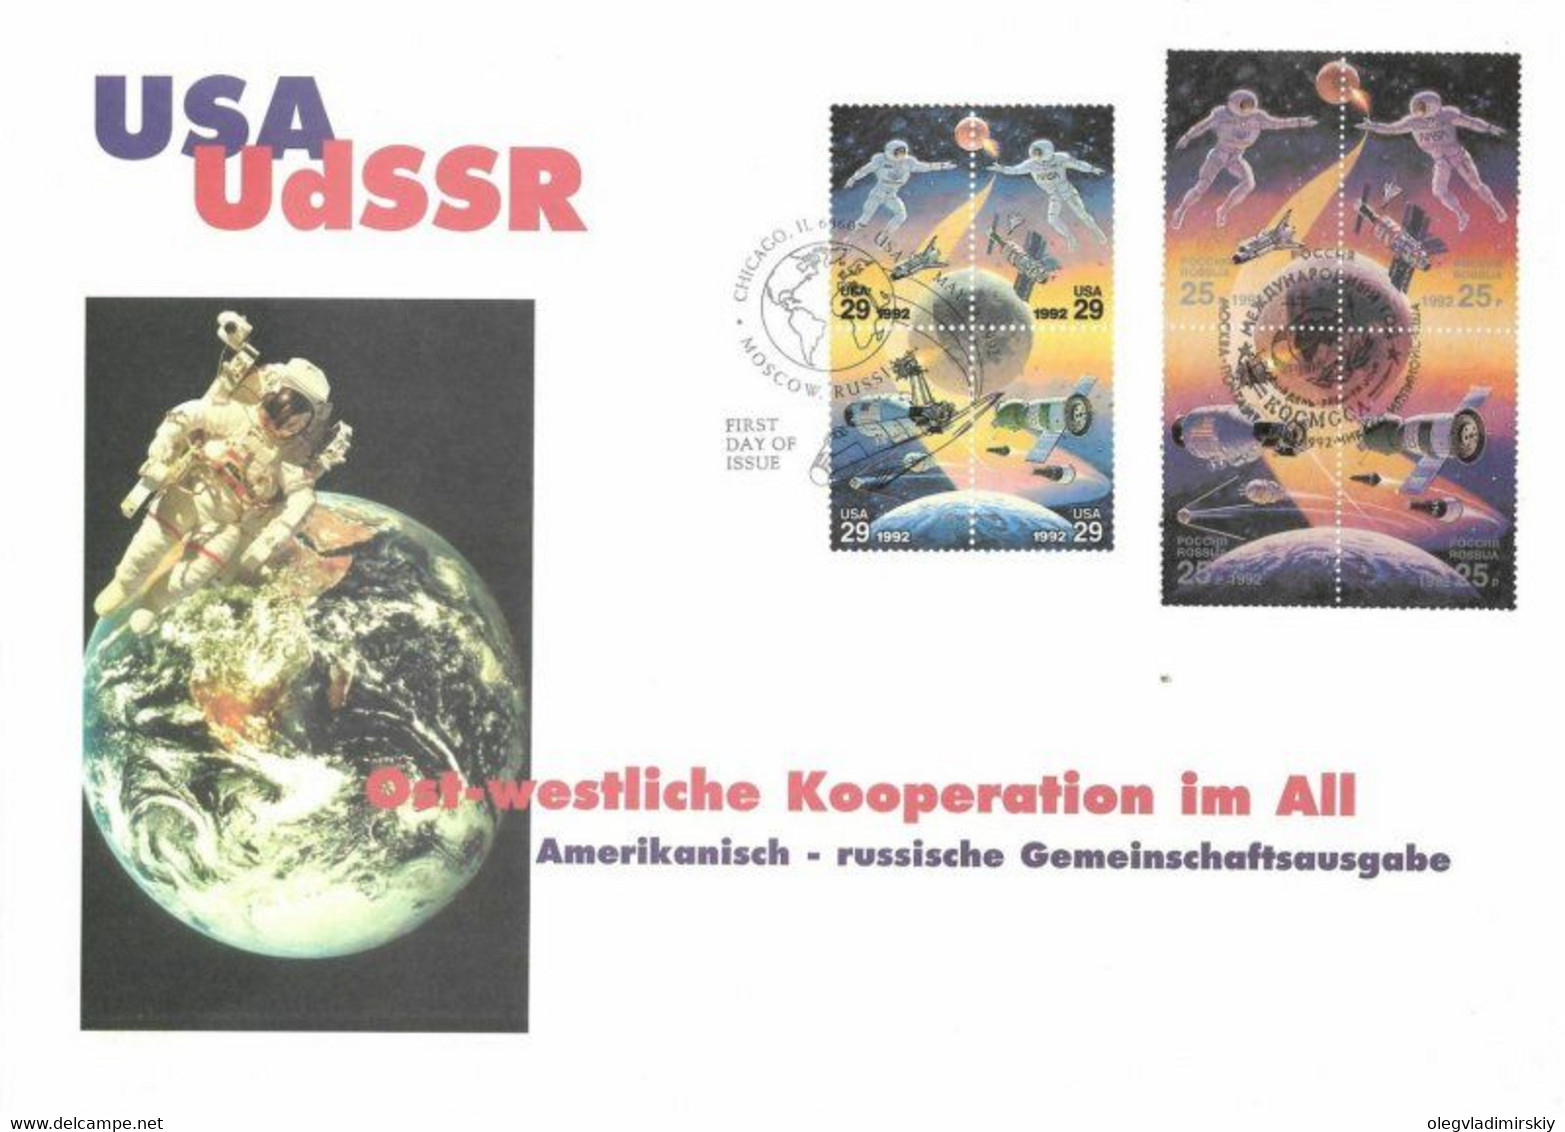 Russia USA 1992 Space Exploration Joint Issue Rare FDC With Cancellations Of Moscow And Chicago - FDC